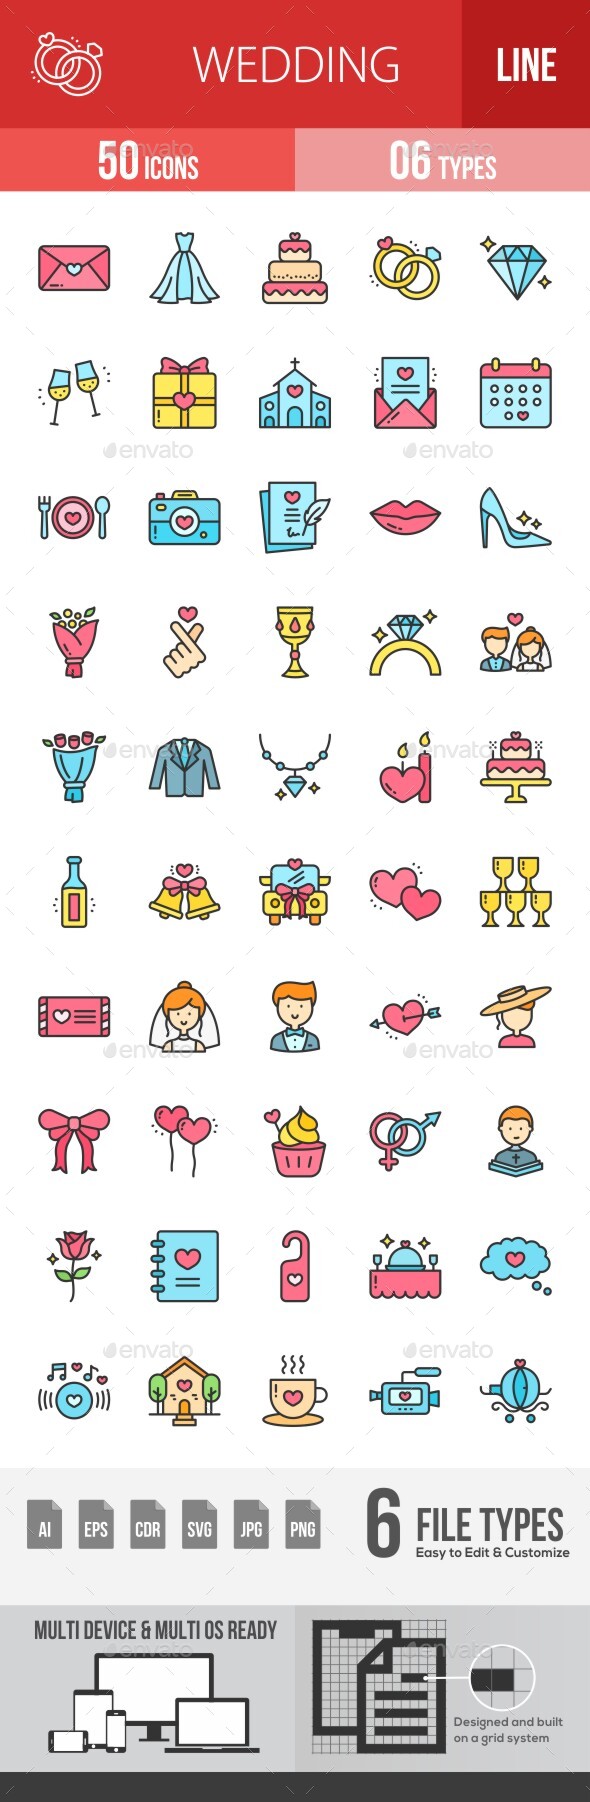 [DOWNLOAD]Wedding Filled Line Icons